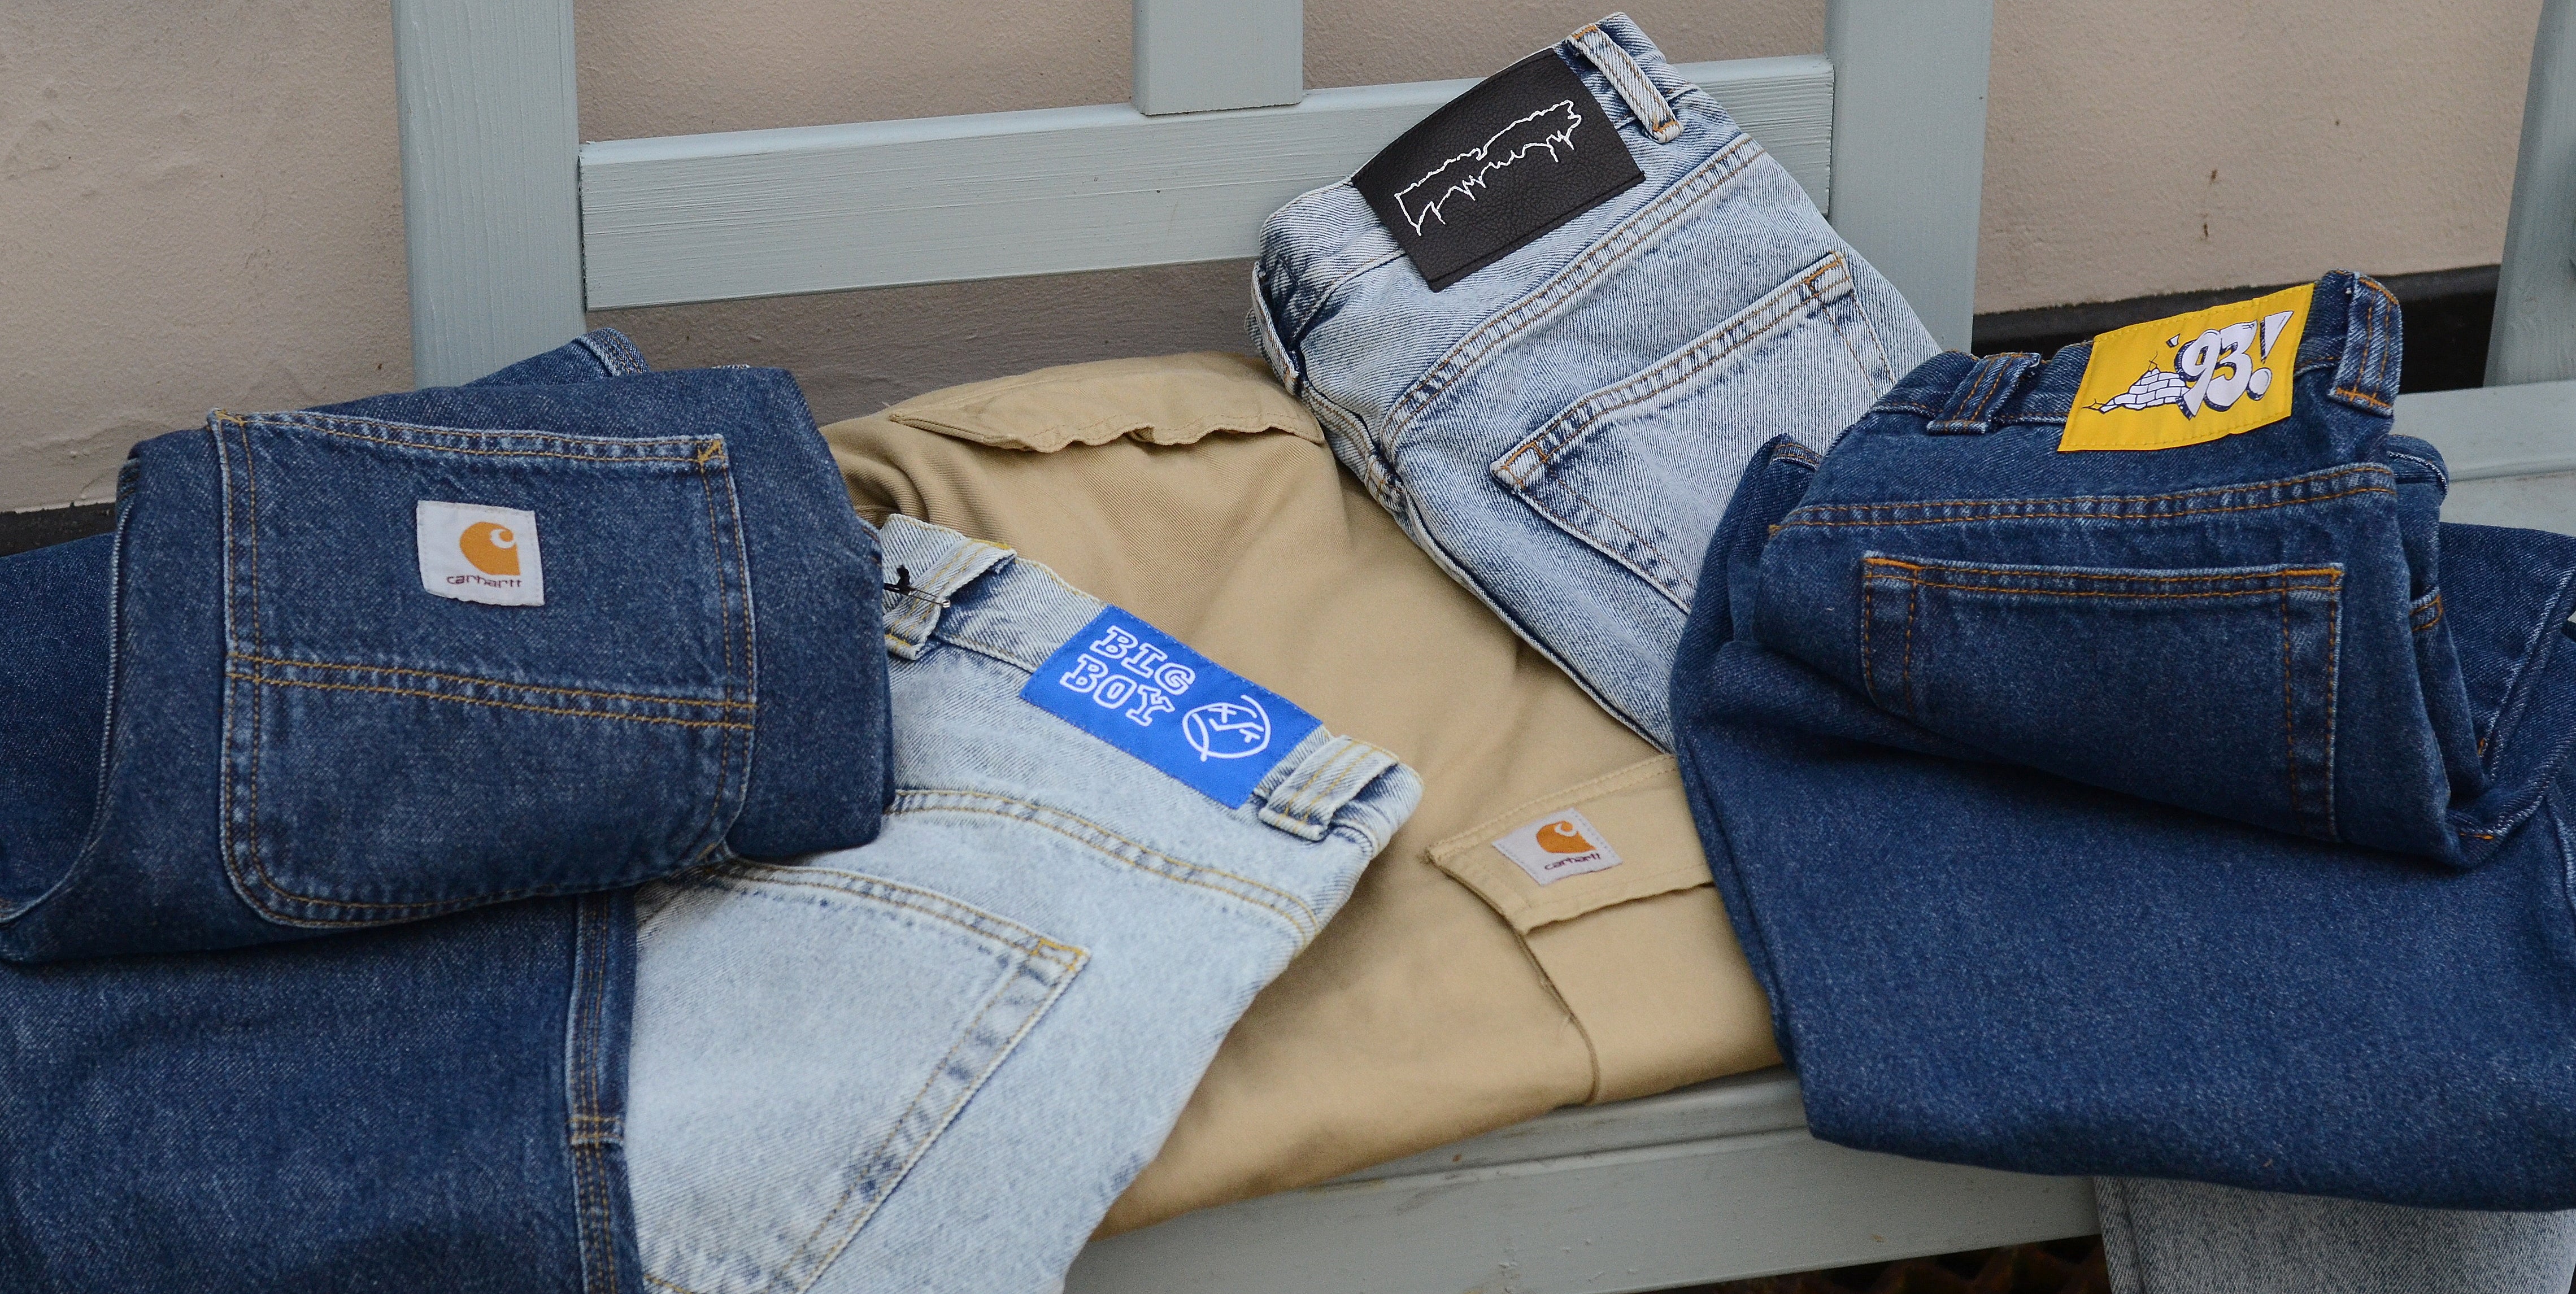 SparkyStore - New Carhartt WIP Pants in store. Cargo's